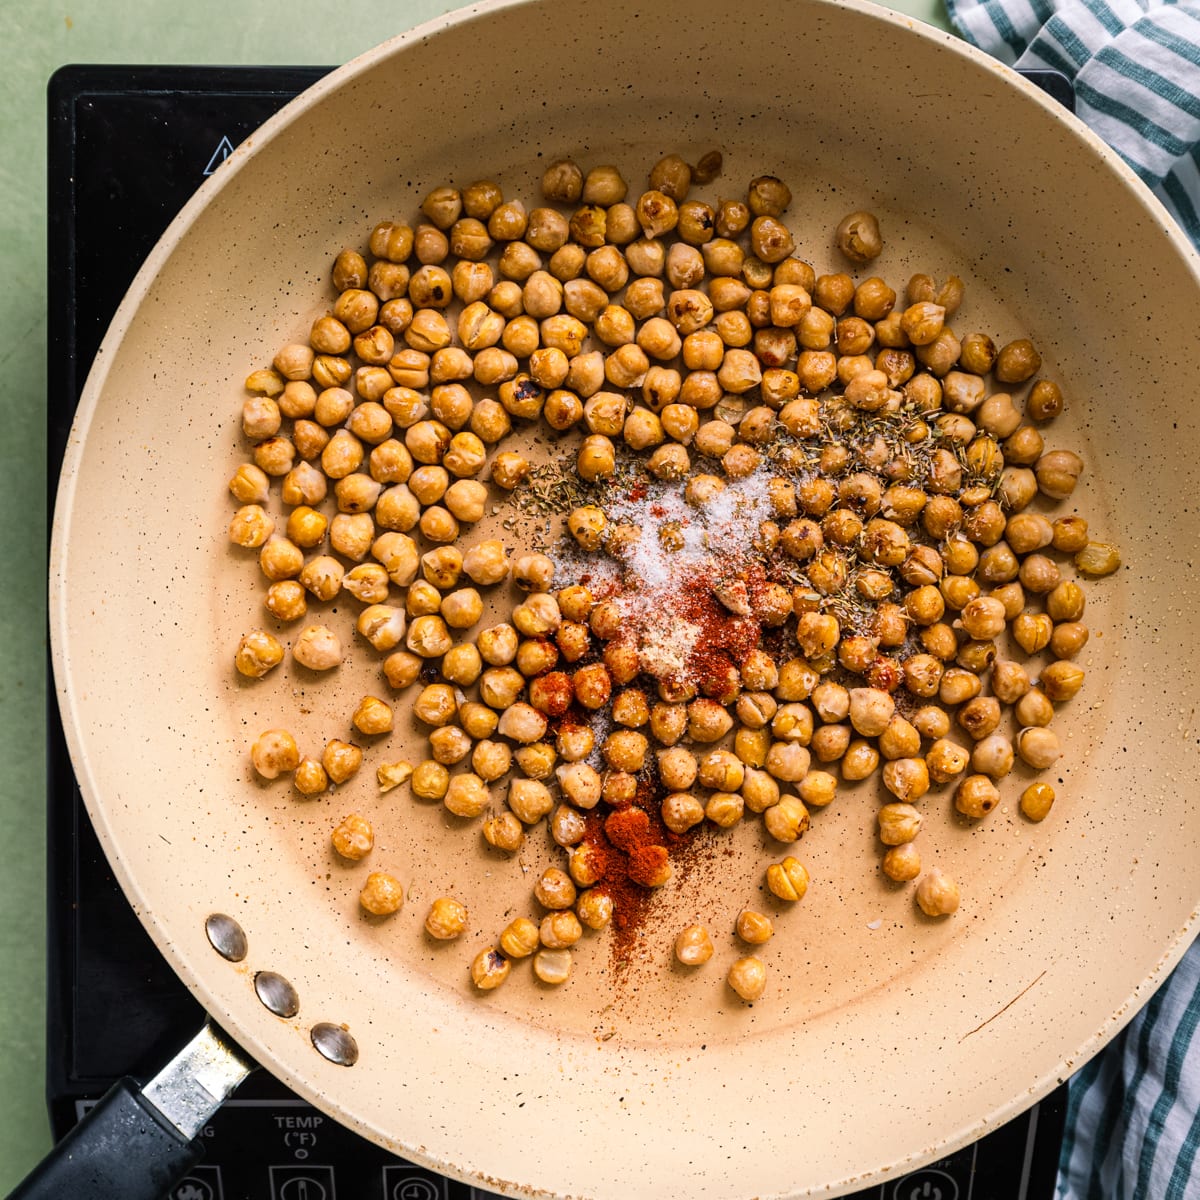 pan-frying chickpeas with spices in a saute pan